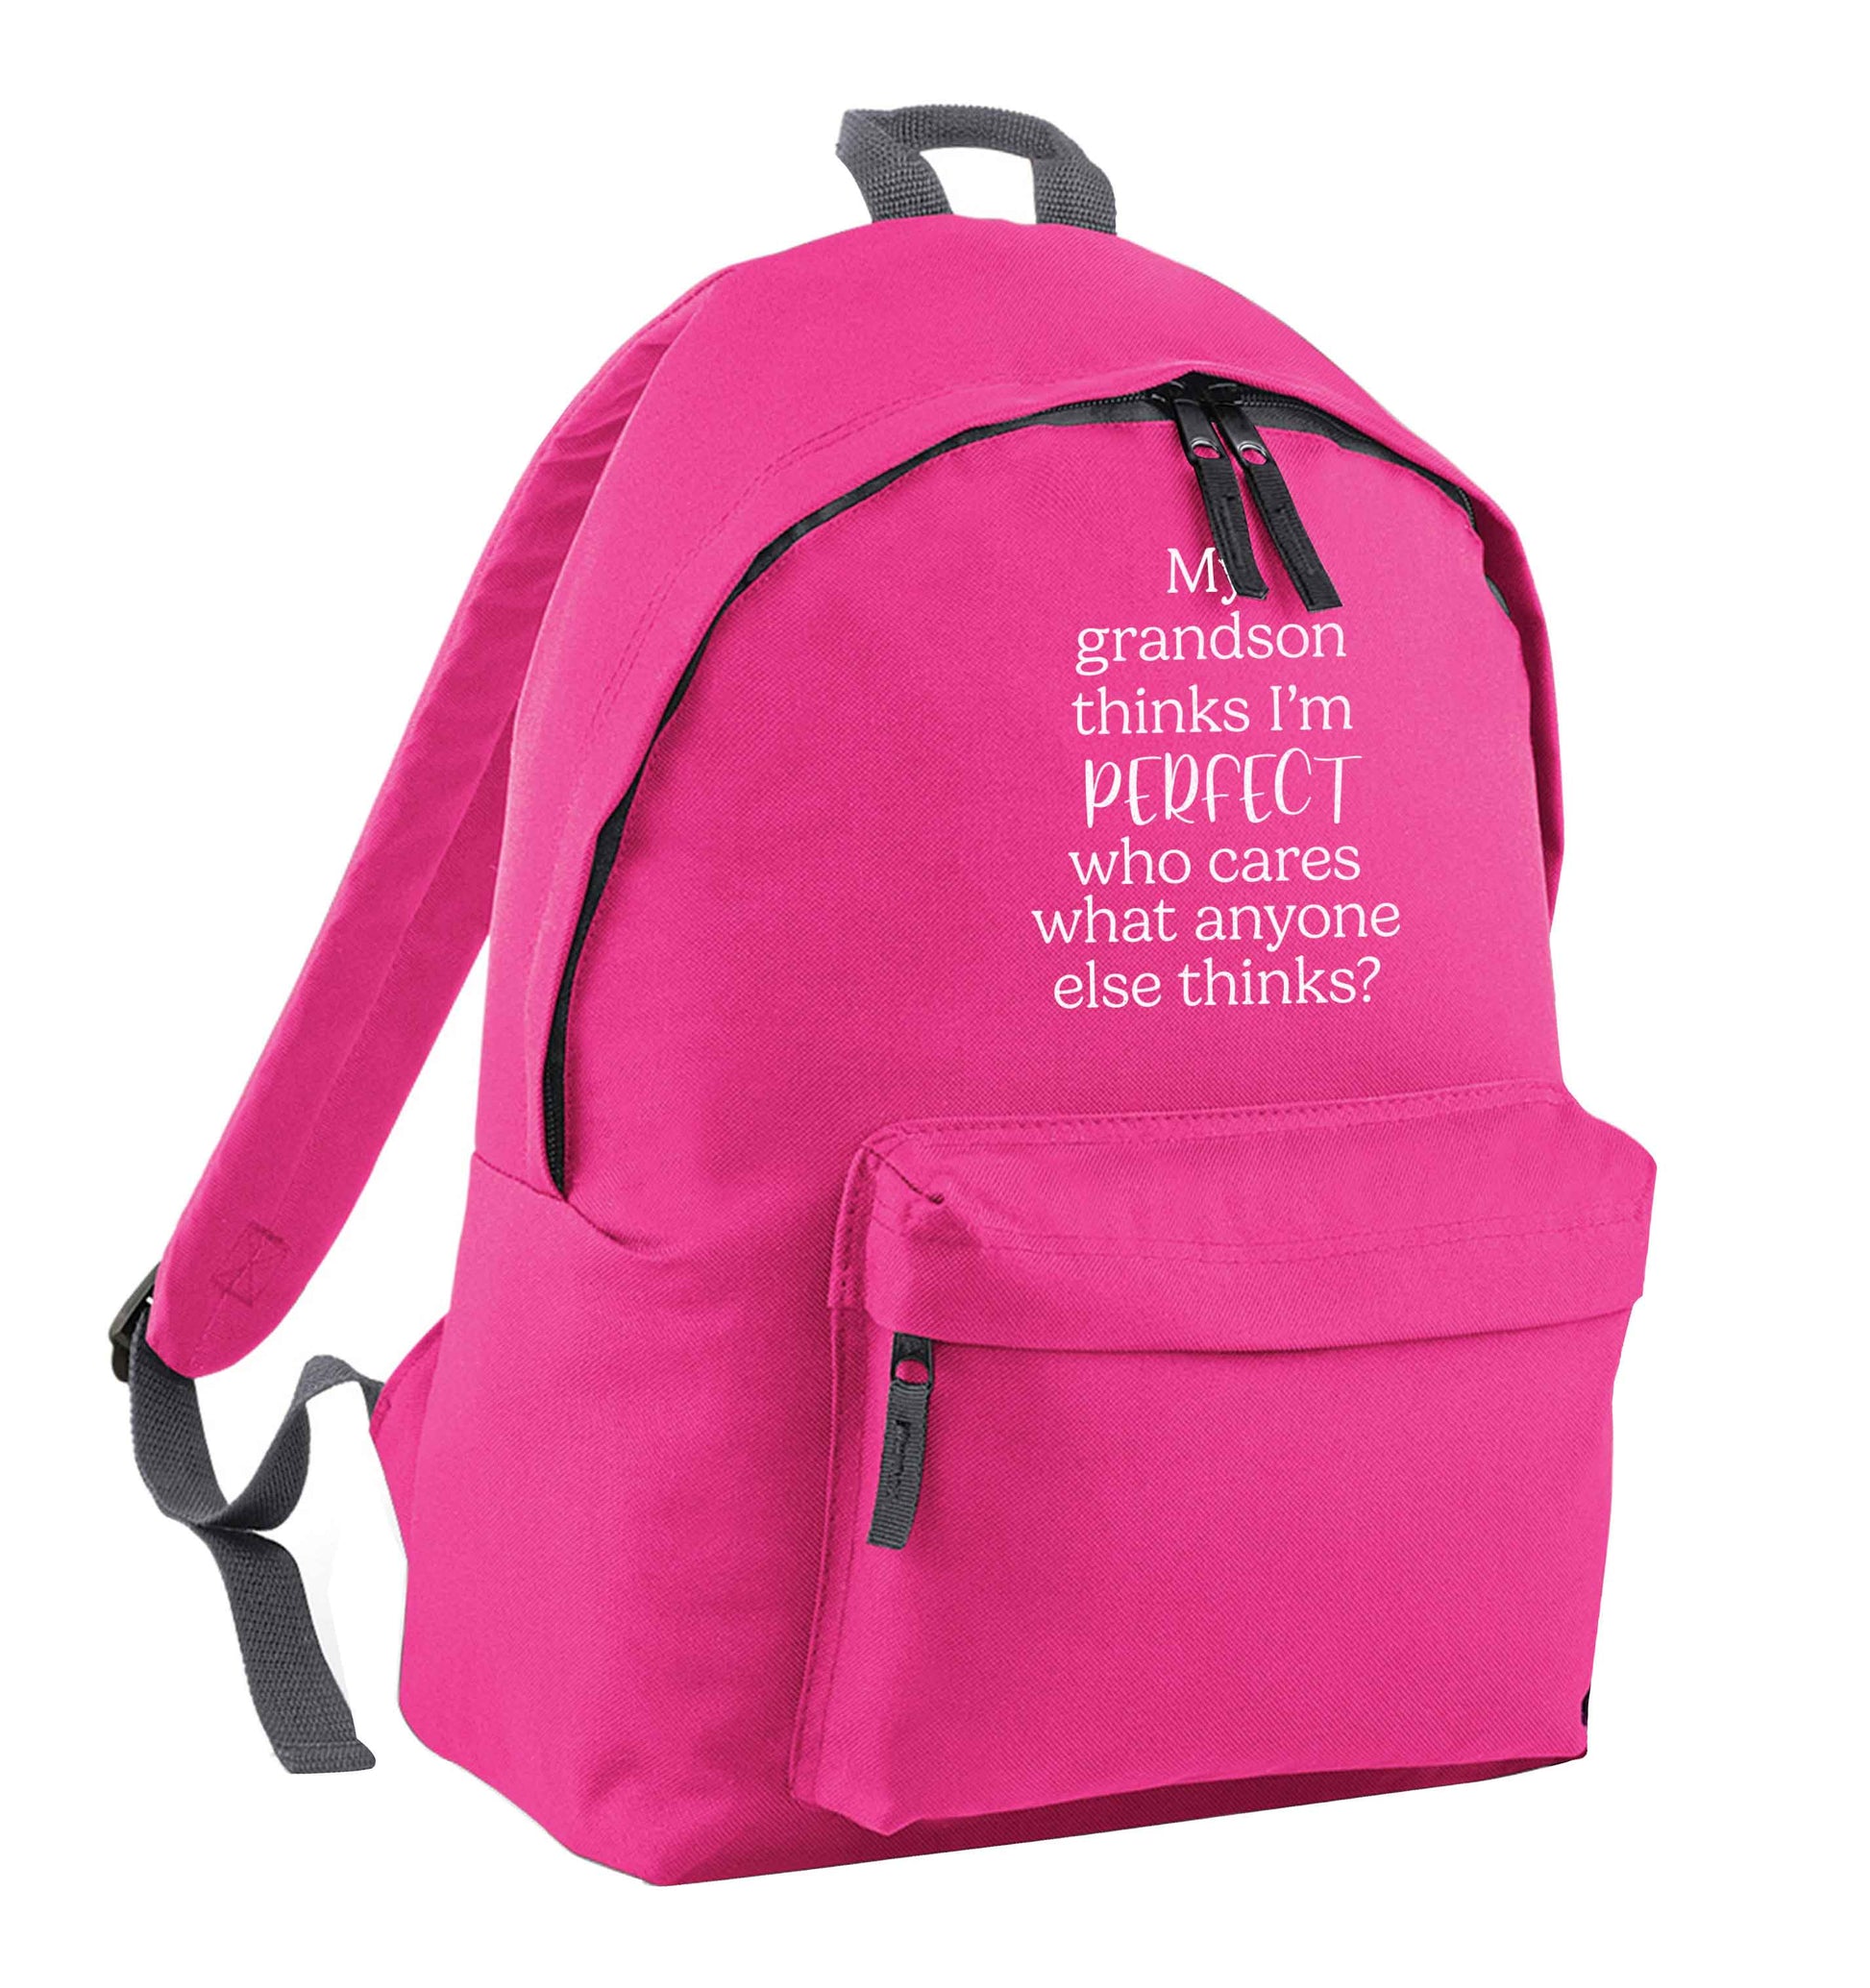 My Grandson thinks I'm perfect who cares what anyone else thinks? pink adults backpack